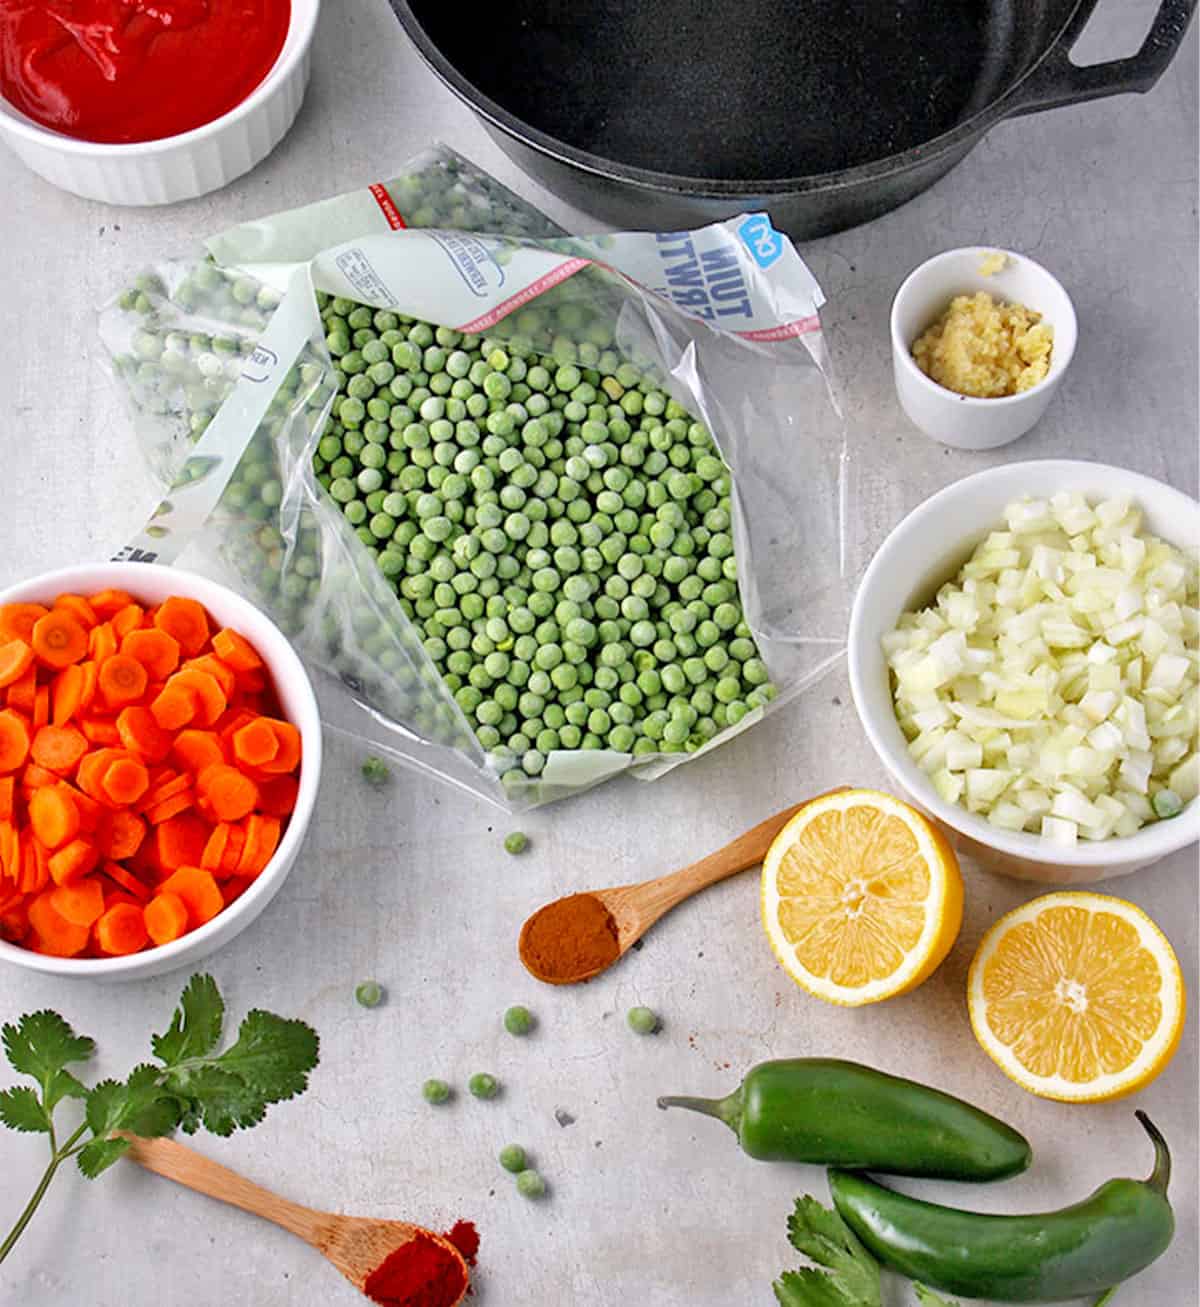 The ingredients for pea stew are laid out on a board.